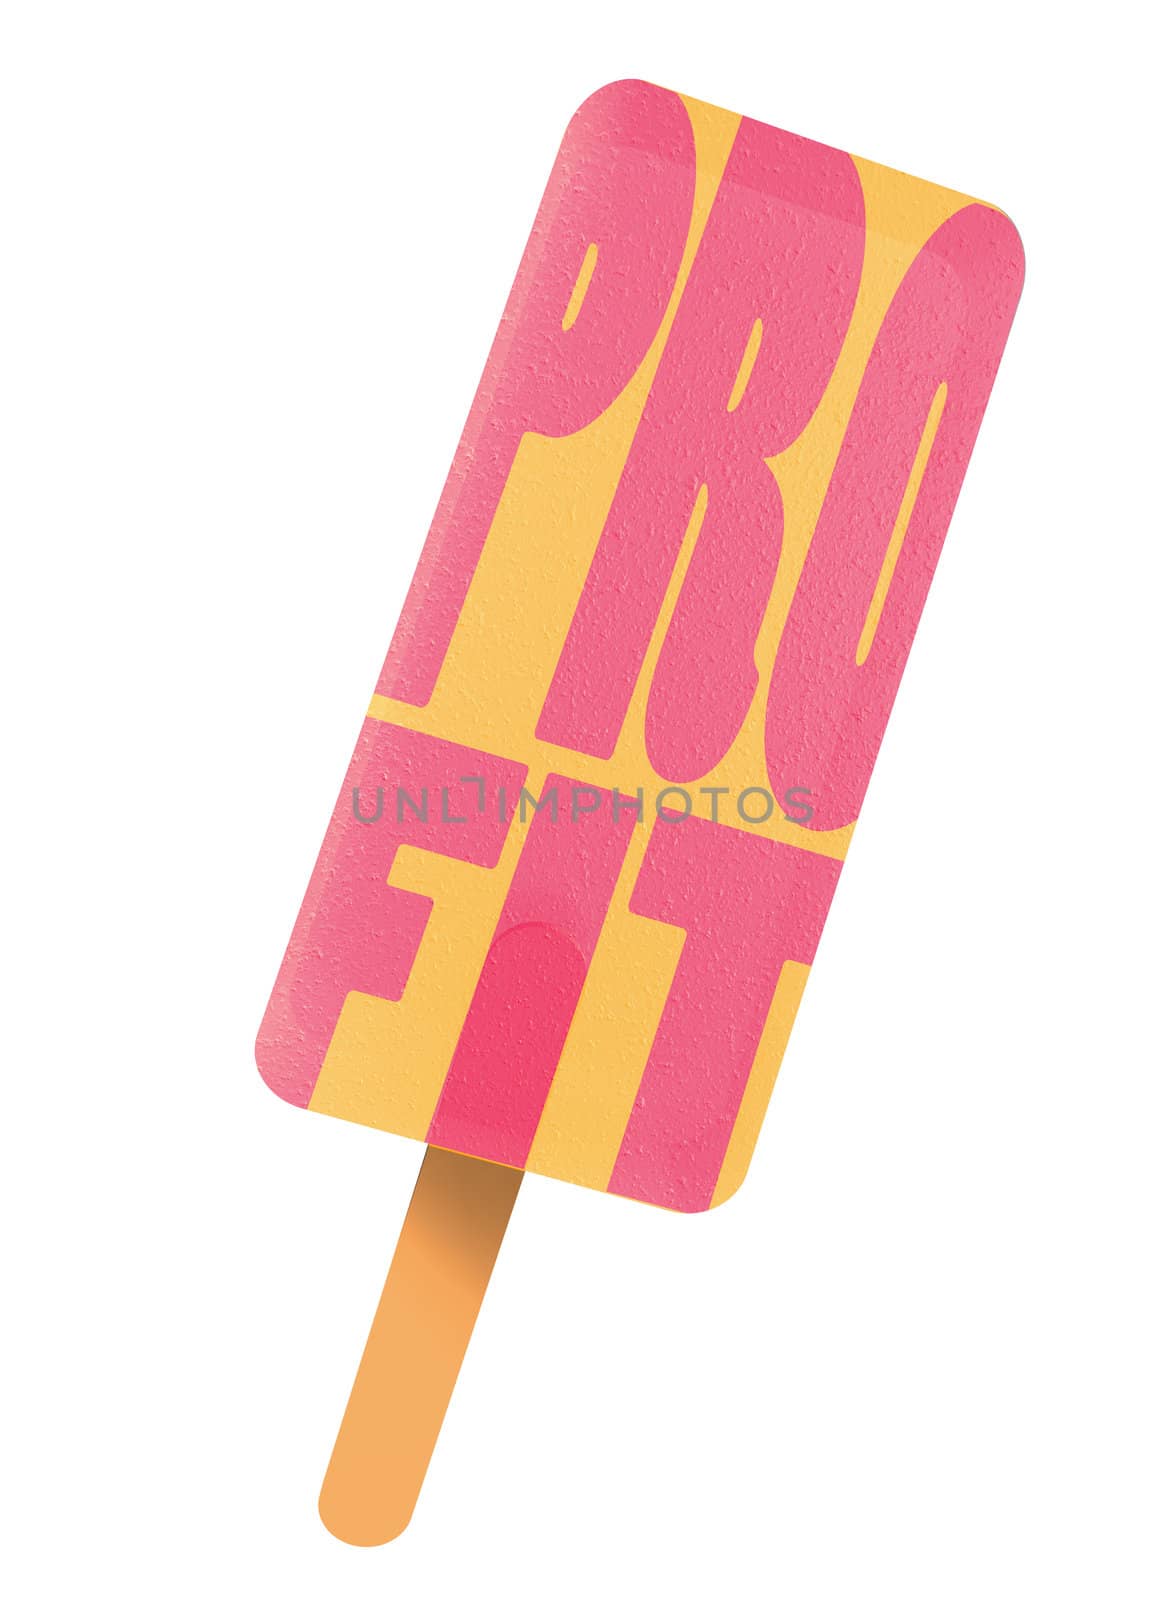 Profit is always sweet and yummy as icream bar.